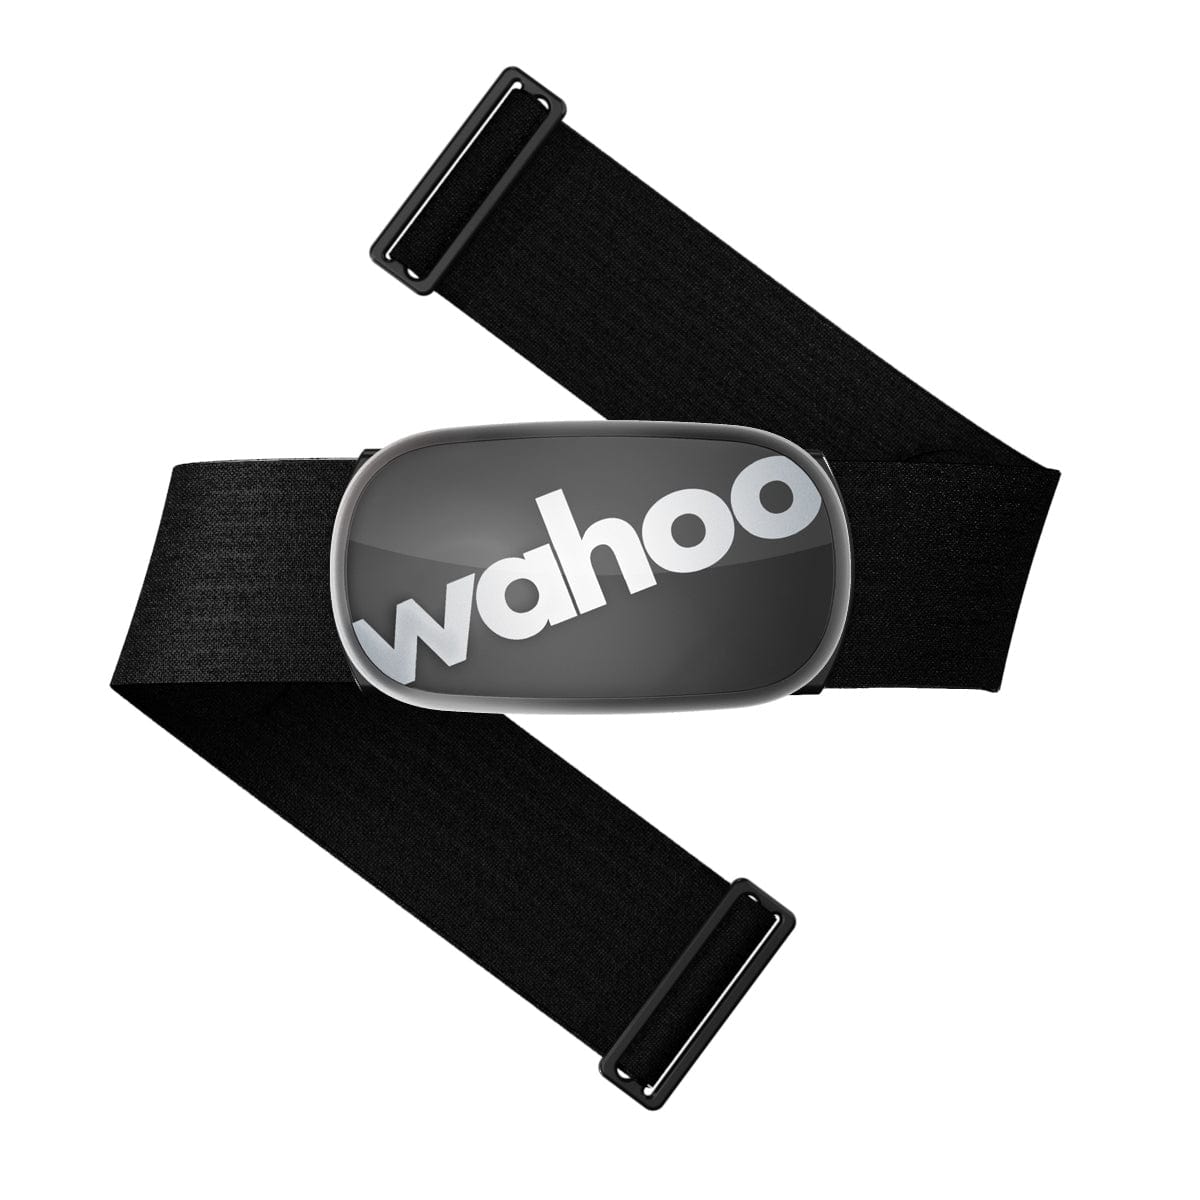 Wahoo TICKR Heart Rate Monitor Gen 2 - Stealth